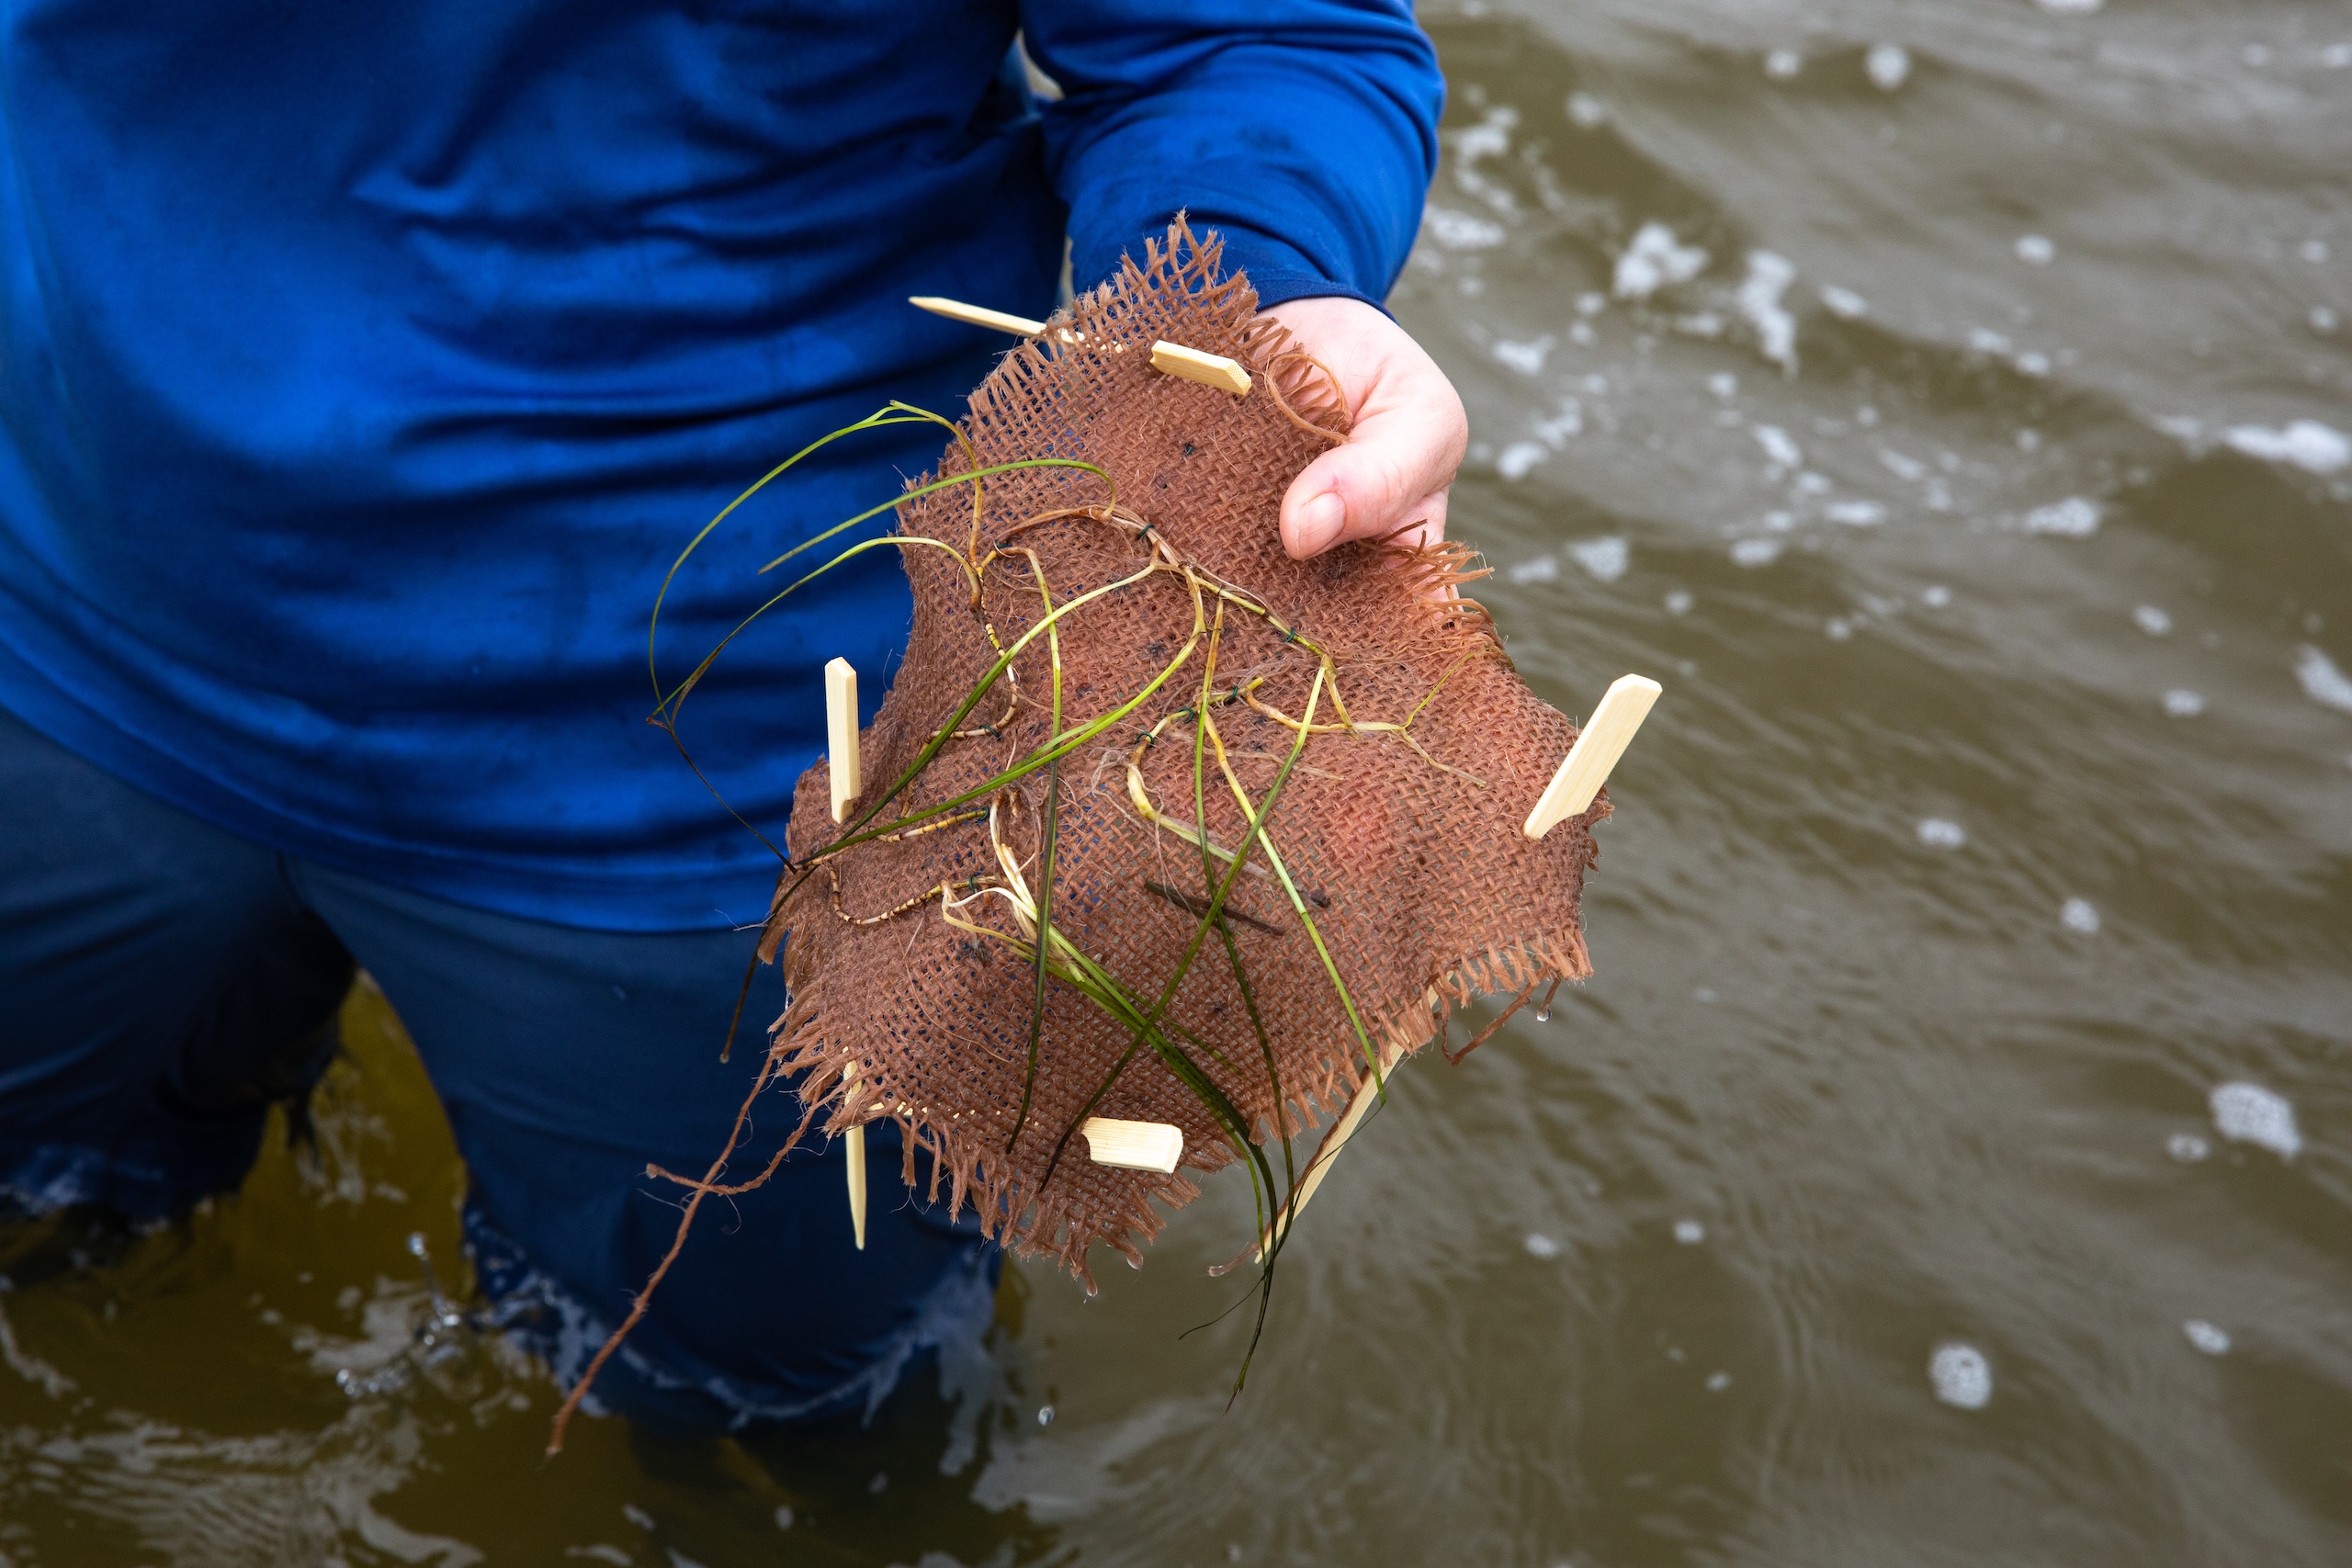 Person dressed in blue holding a square of red burlap with seagrass tied to it